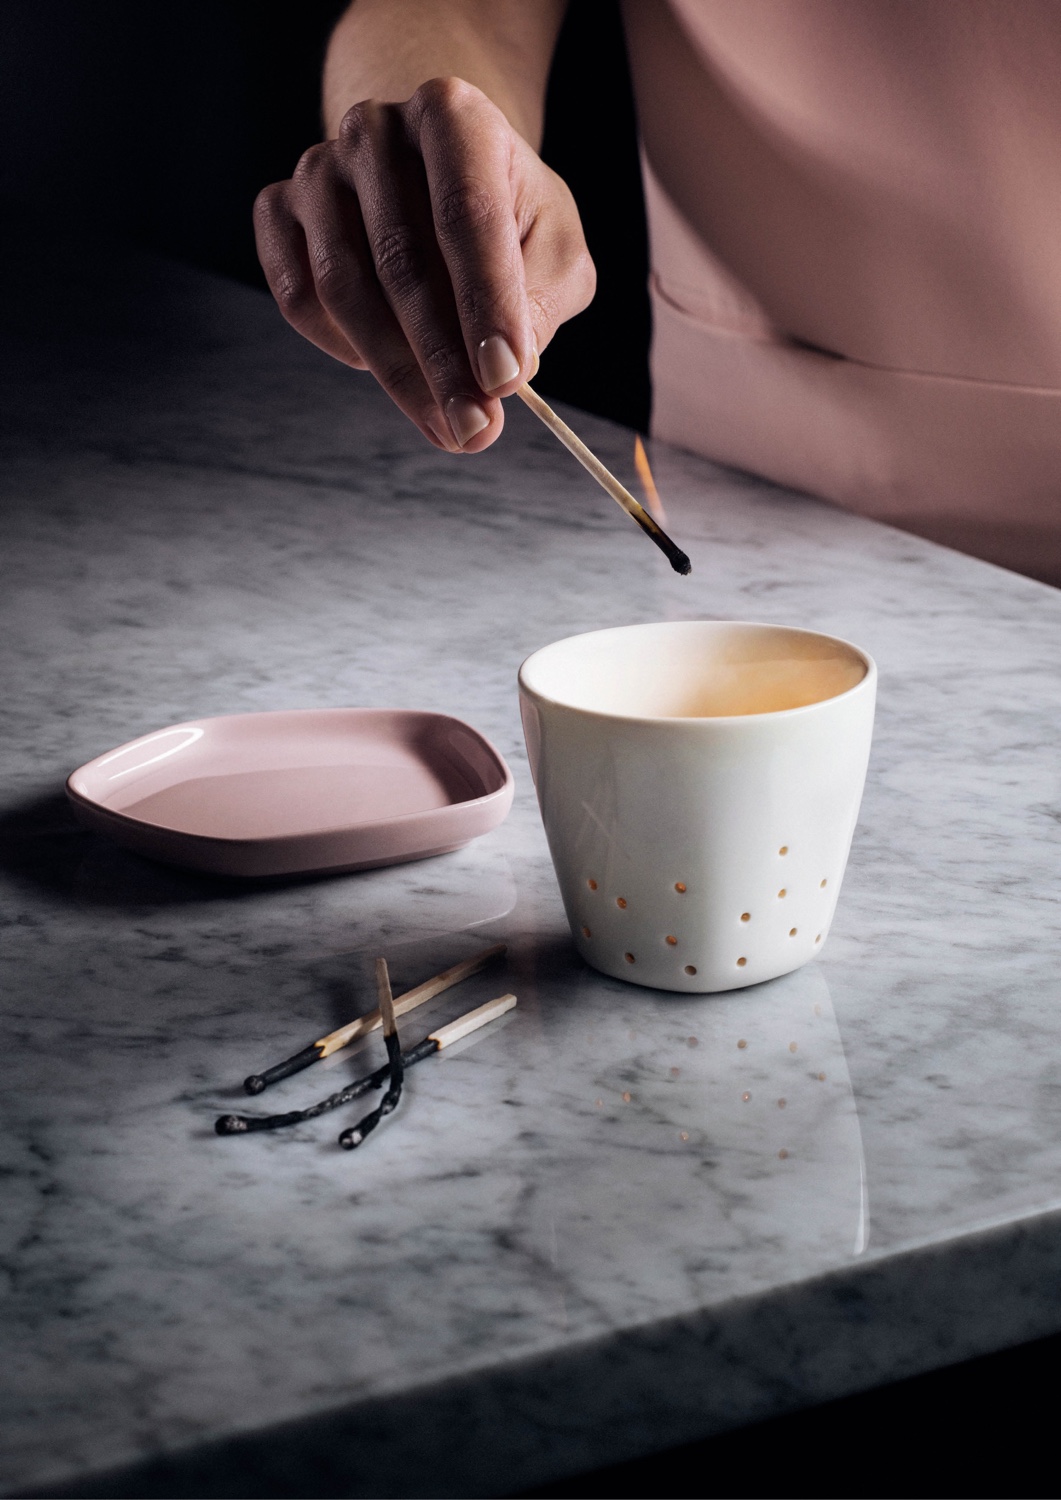 Iittala X Issey Miyake 'Pause For Harmony' collection. This collaboration pairs the intricate and curious worlds of Finnish and Japanese design, bringing a sense of harmony to the home. Image © Fiskars Finland.